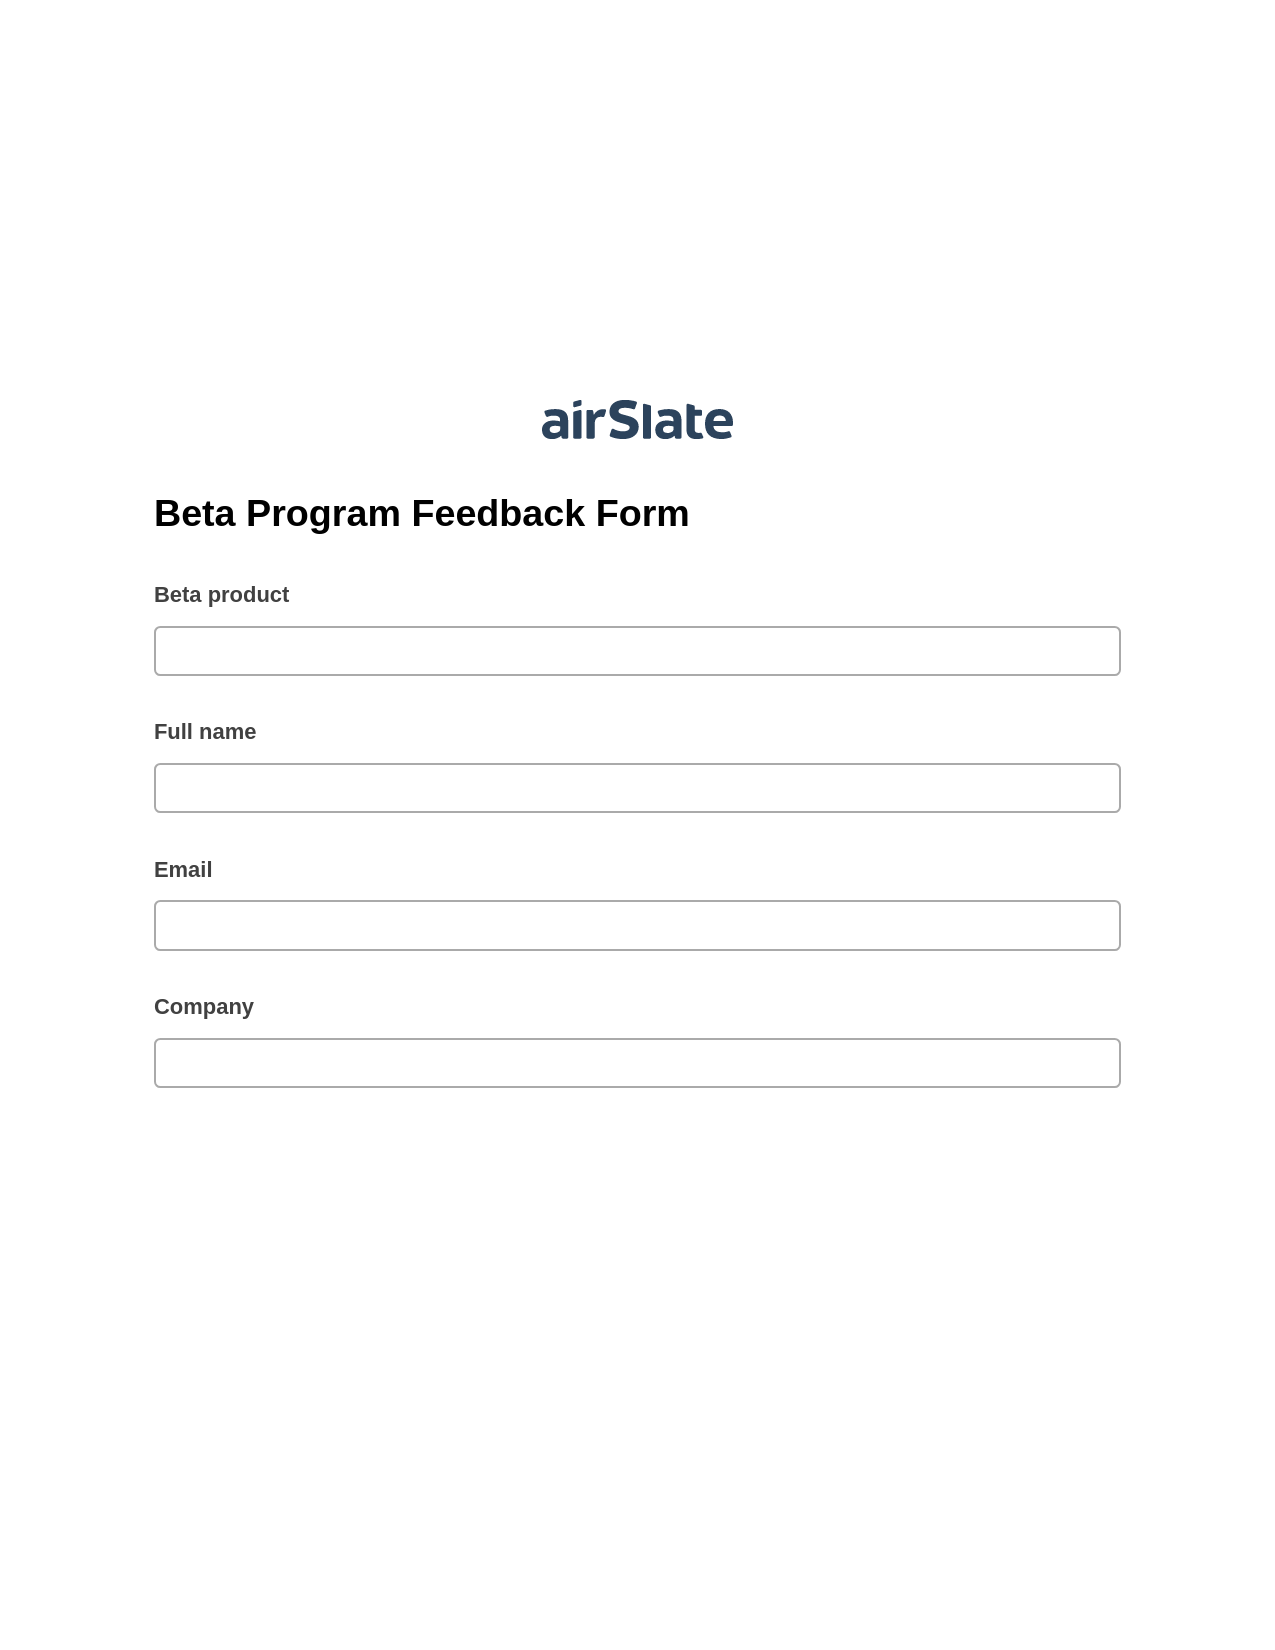 Multirole Beta Program Feedback Form Pre-fill from Salesforce Record Bot, Audit Trail Bot, Archive to SharePoint Folder Bot